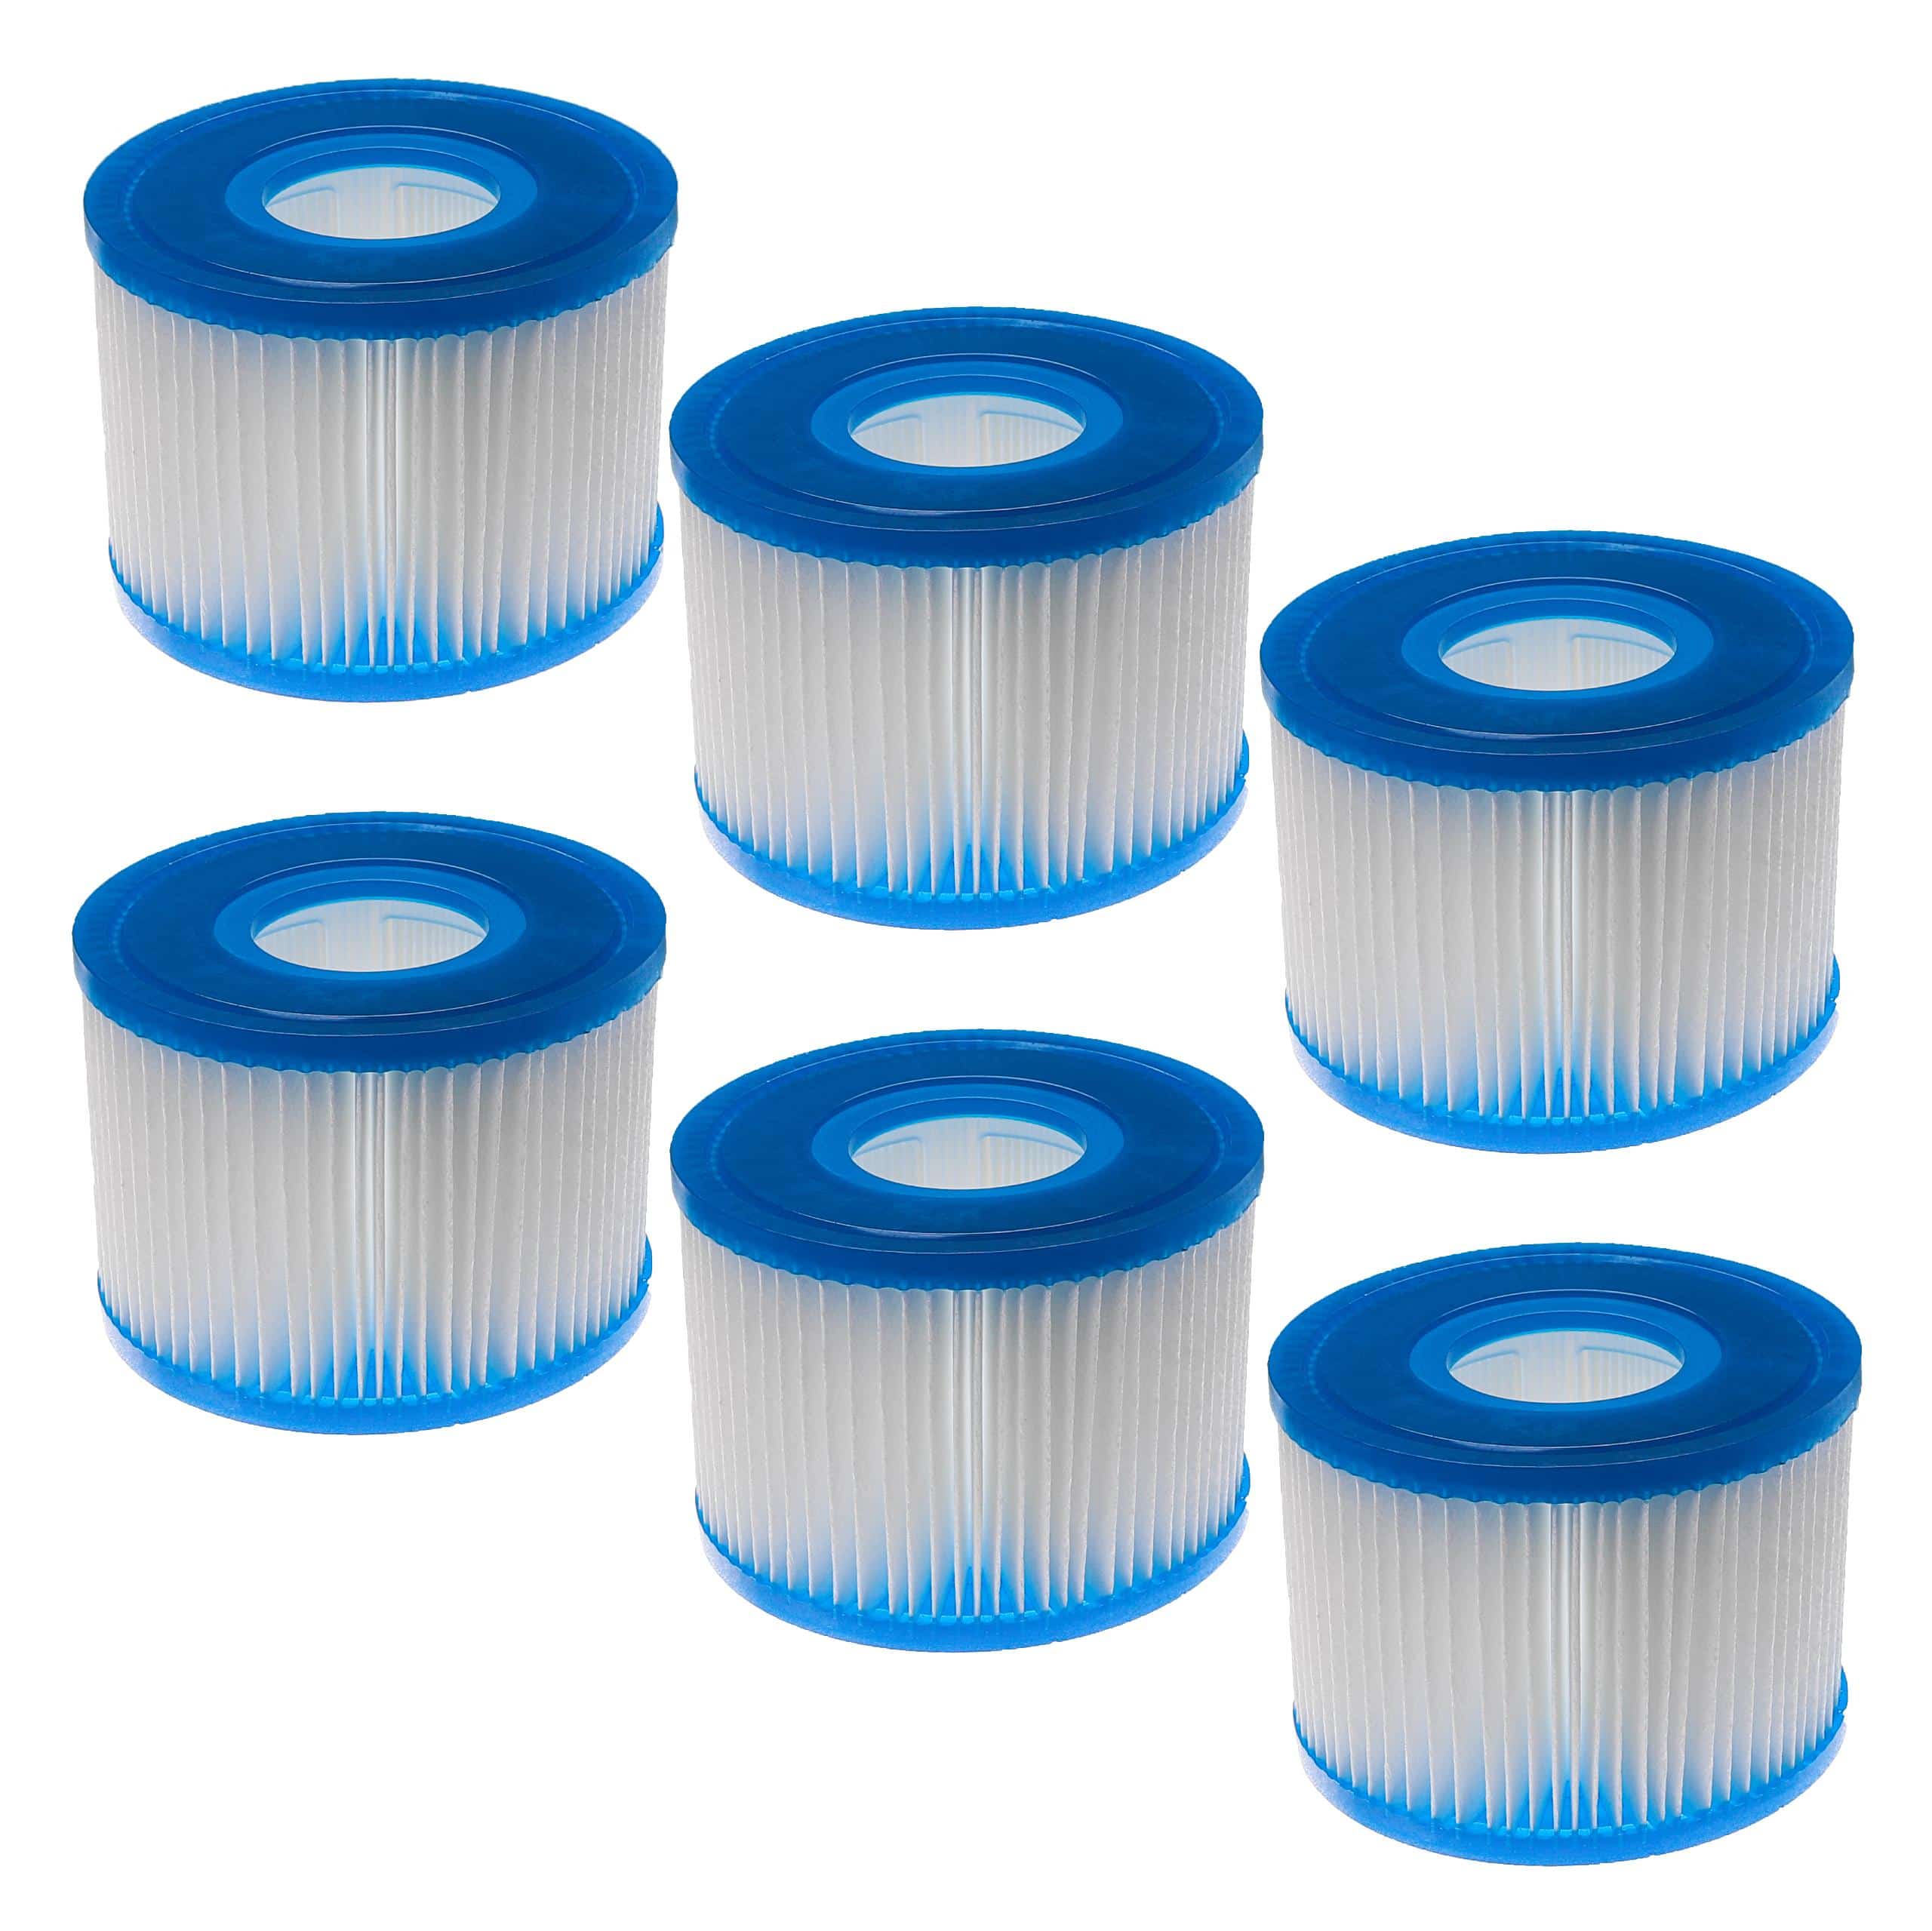 6x Pool Filter Type S1 as Replacement for Bestway FD2135 - Filter Cartridge